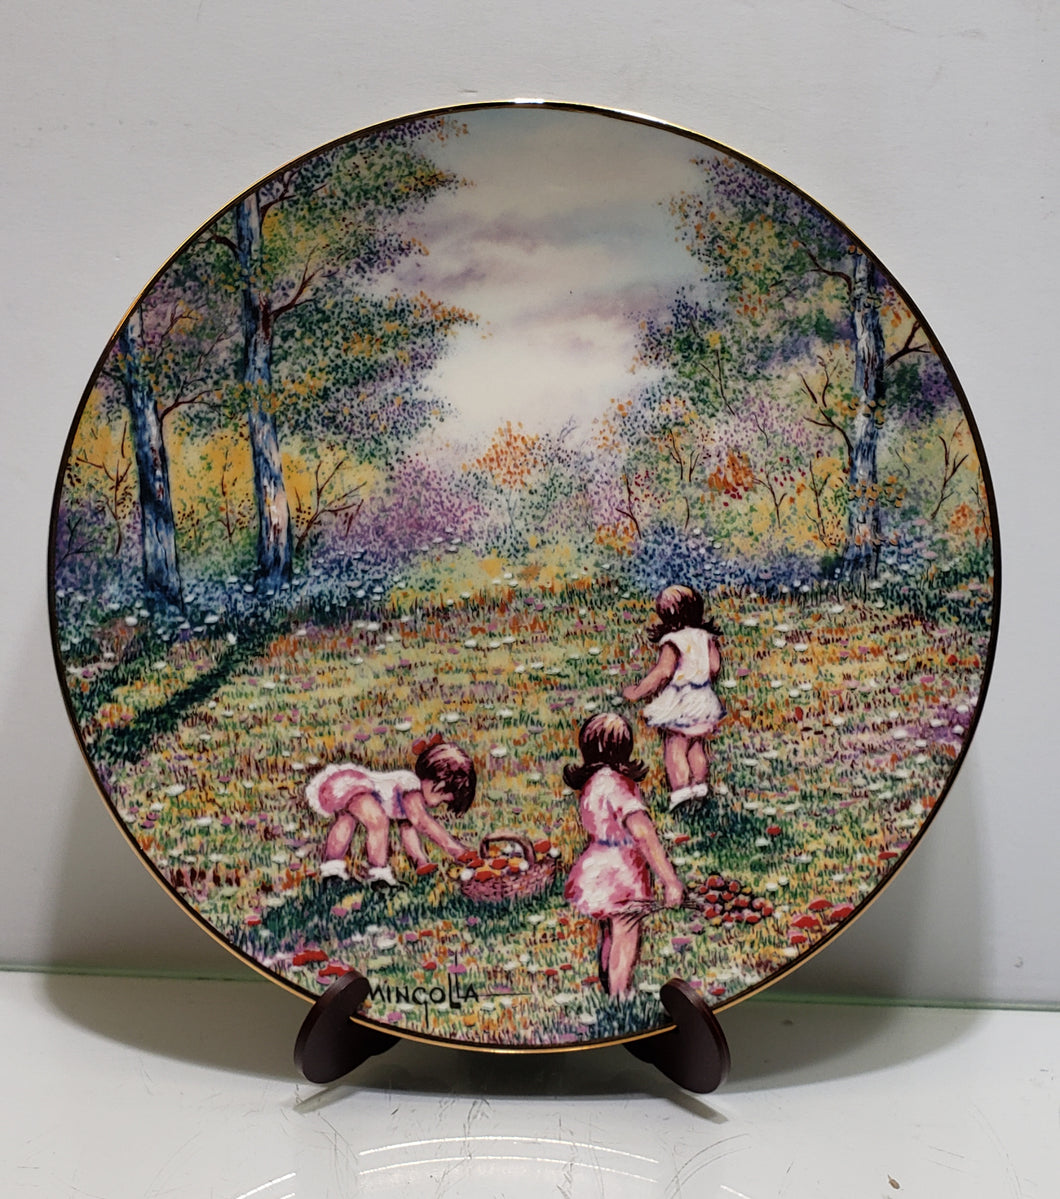 Dominic Mingolla “Picking Flowers” Calhoun Collector Plate